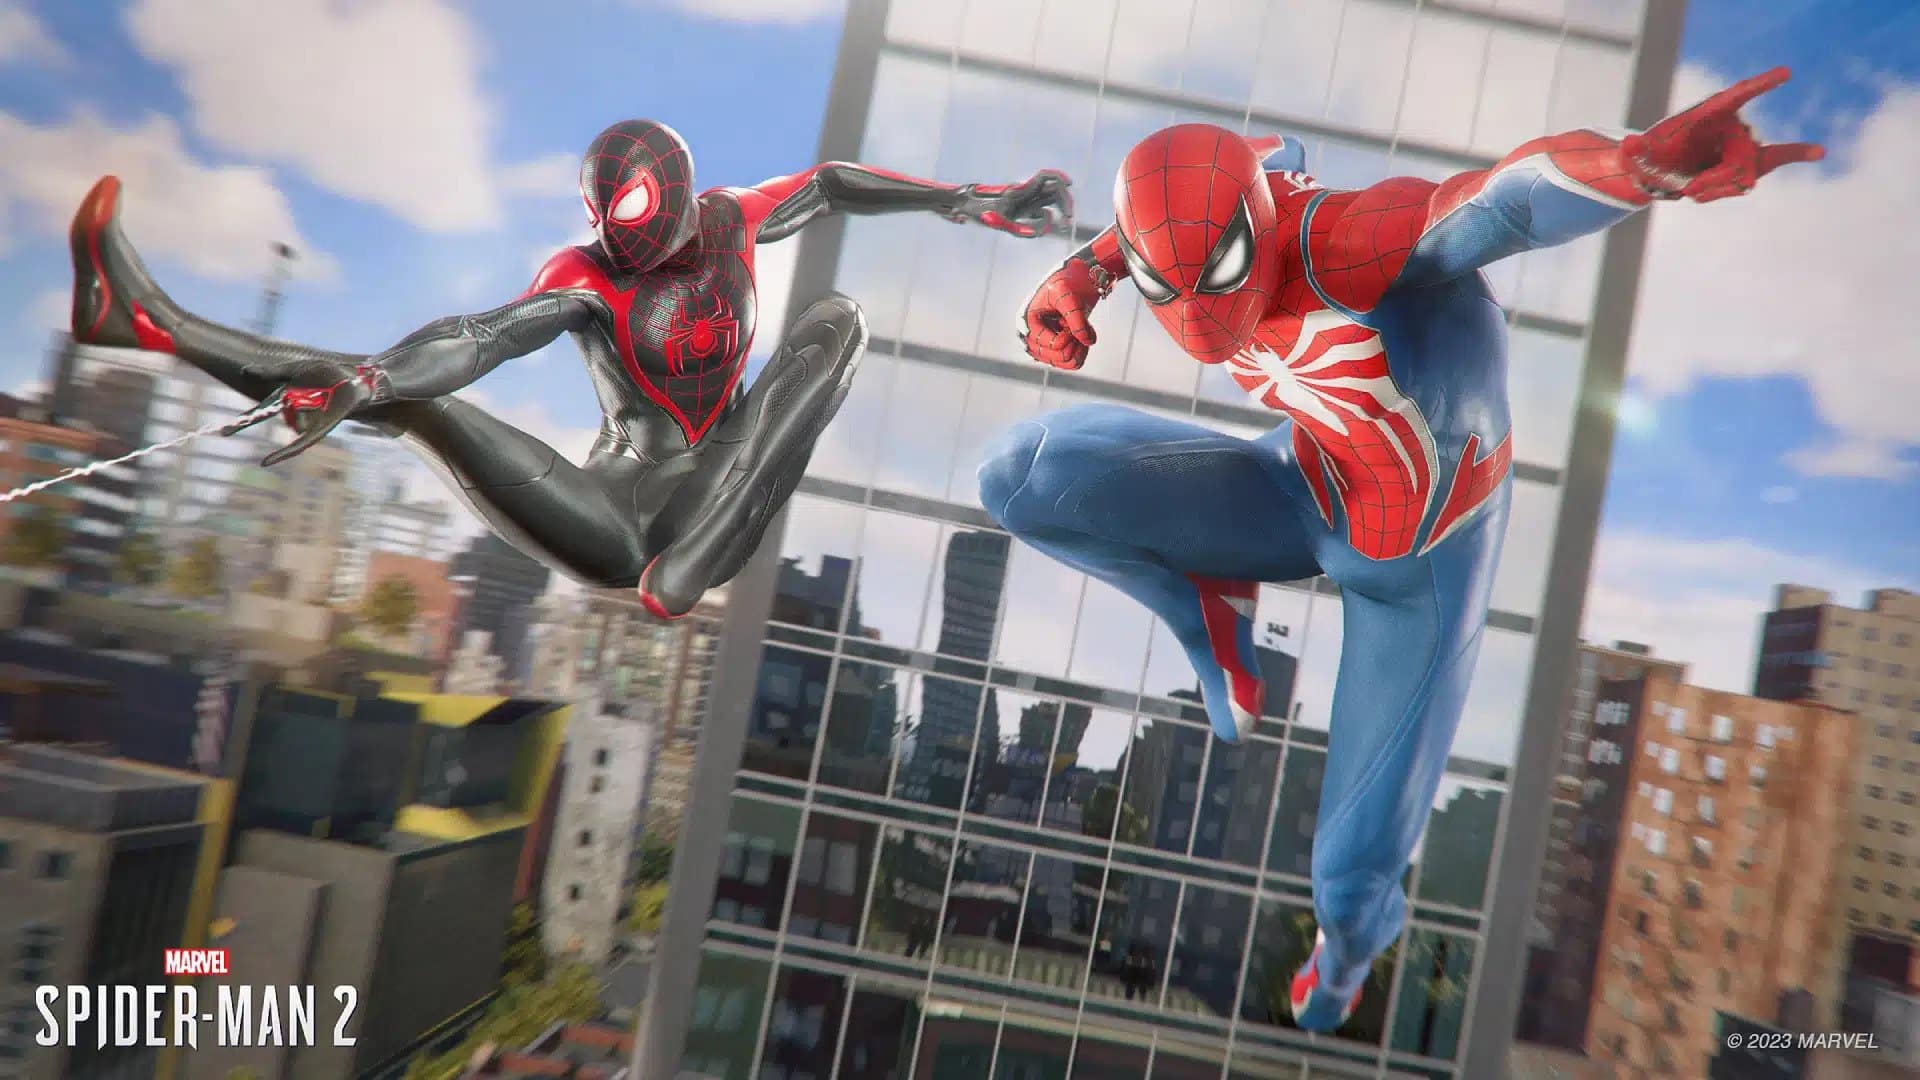 Marvel's Avengers: How To Find And Play As Spider-Man - GameSpot